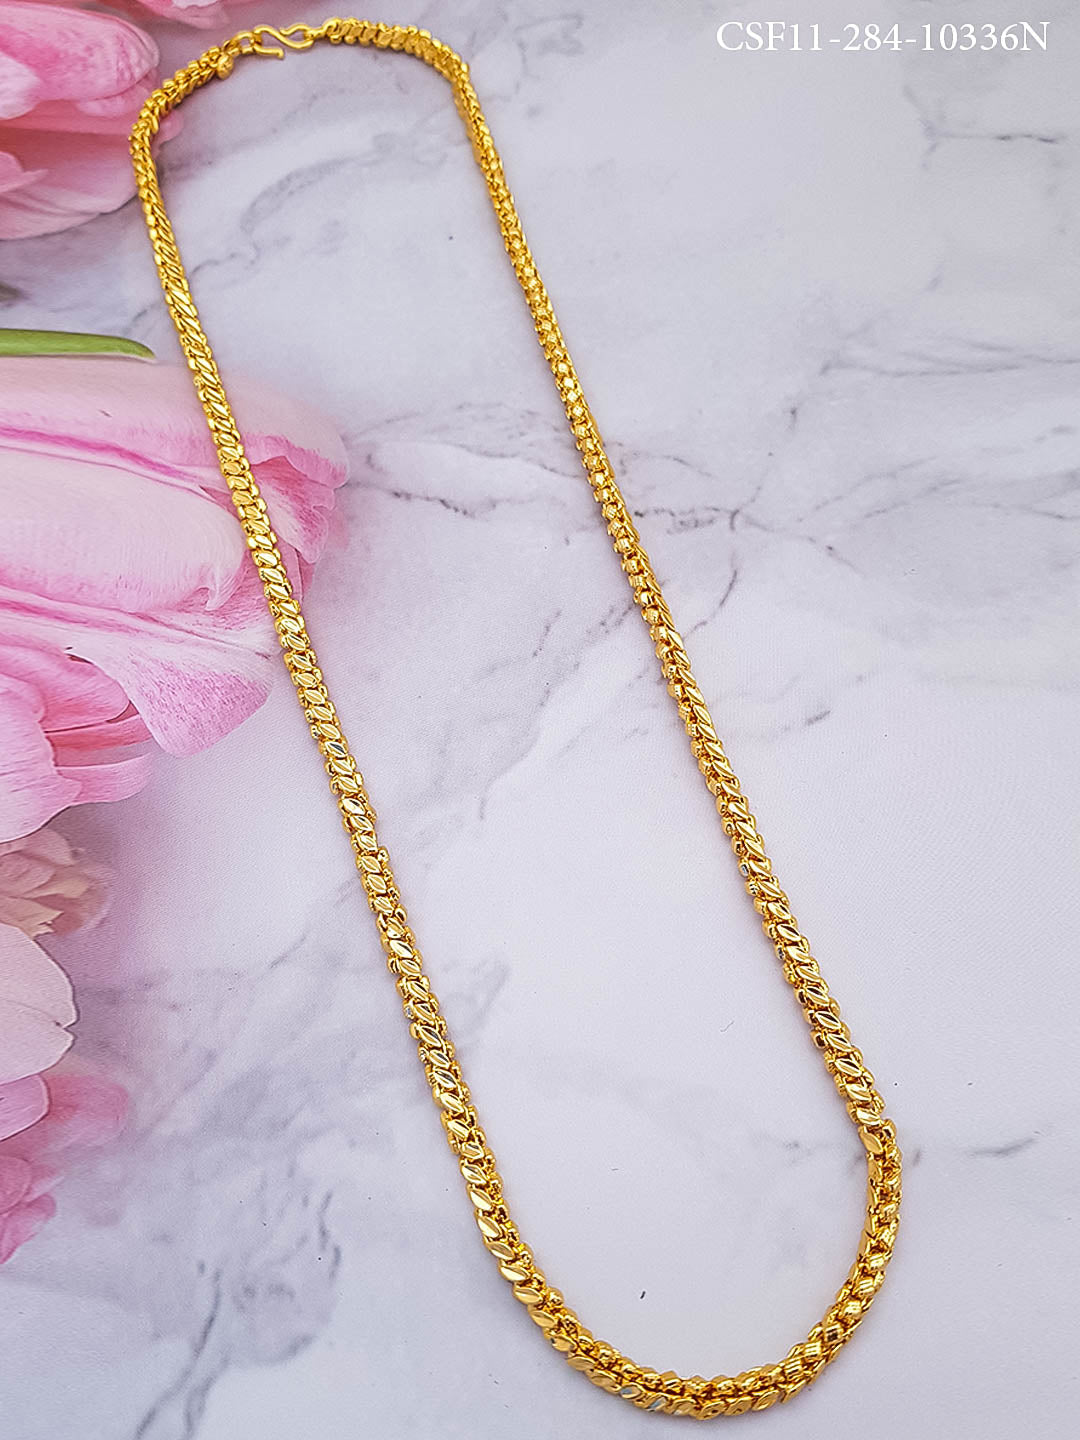 1 gm Micro gold plated thick unisex 18 inches Chain 10336N